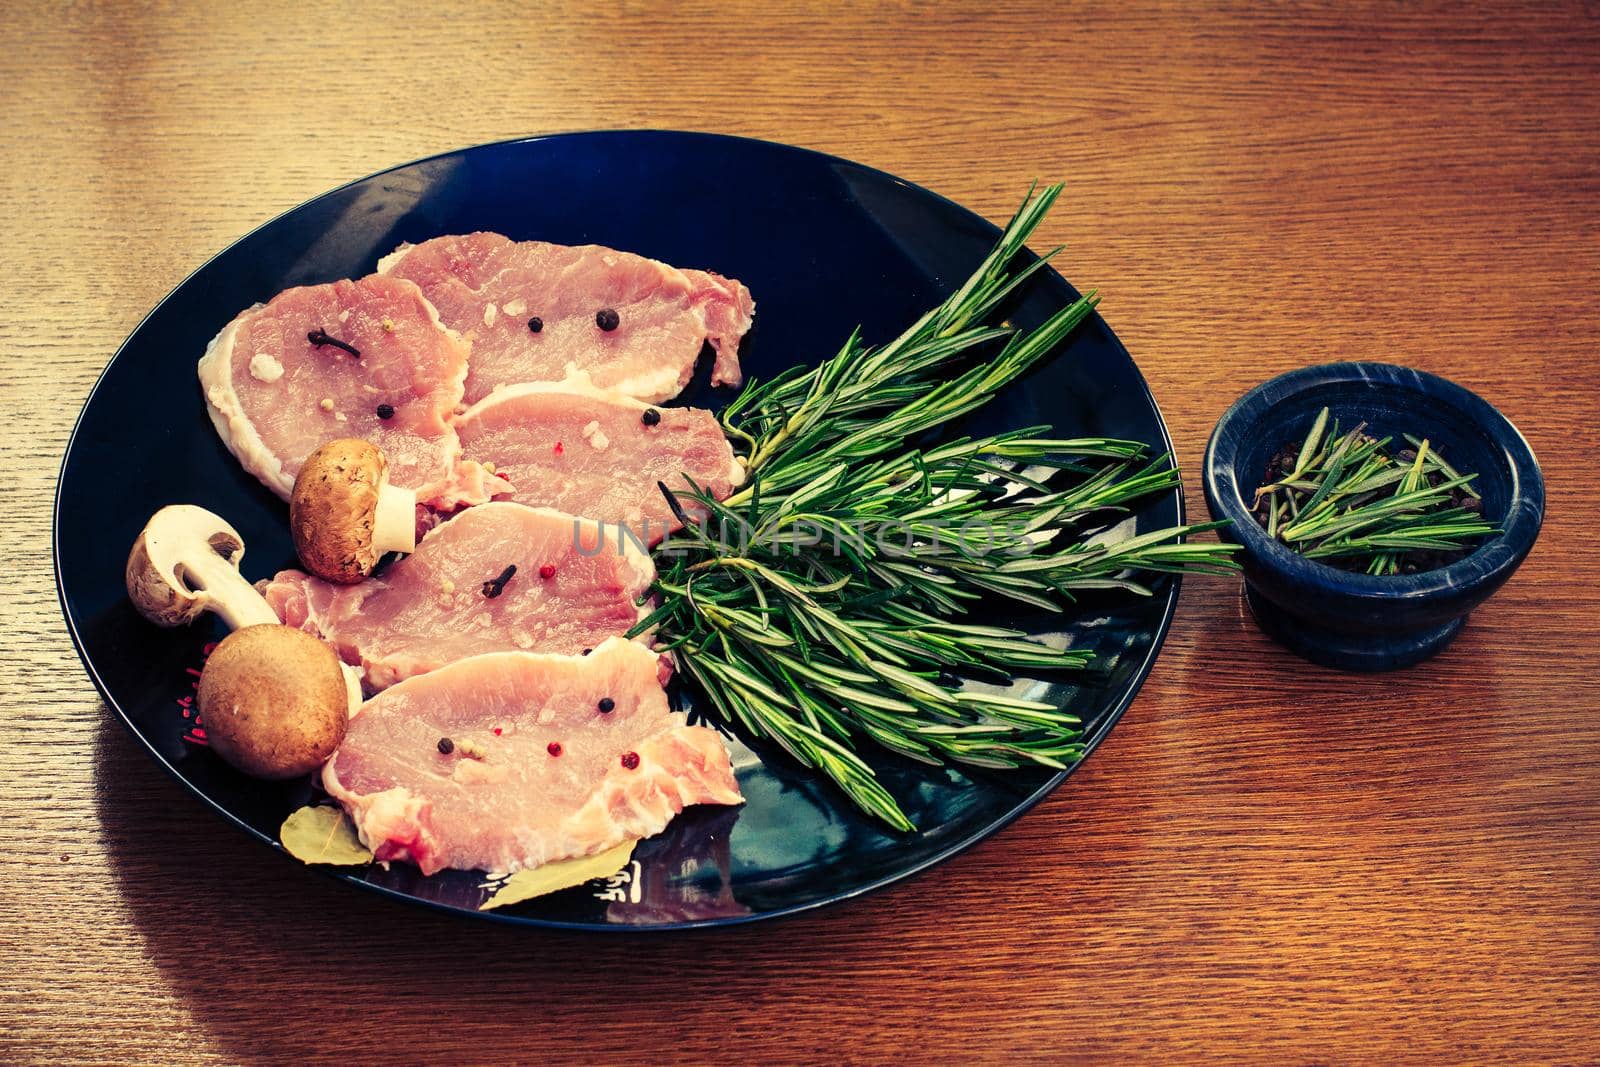 Pieces of raw pork steak with spices and herbs rosemary, mushrooms, salt and pepper on a black plate